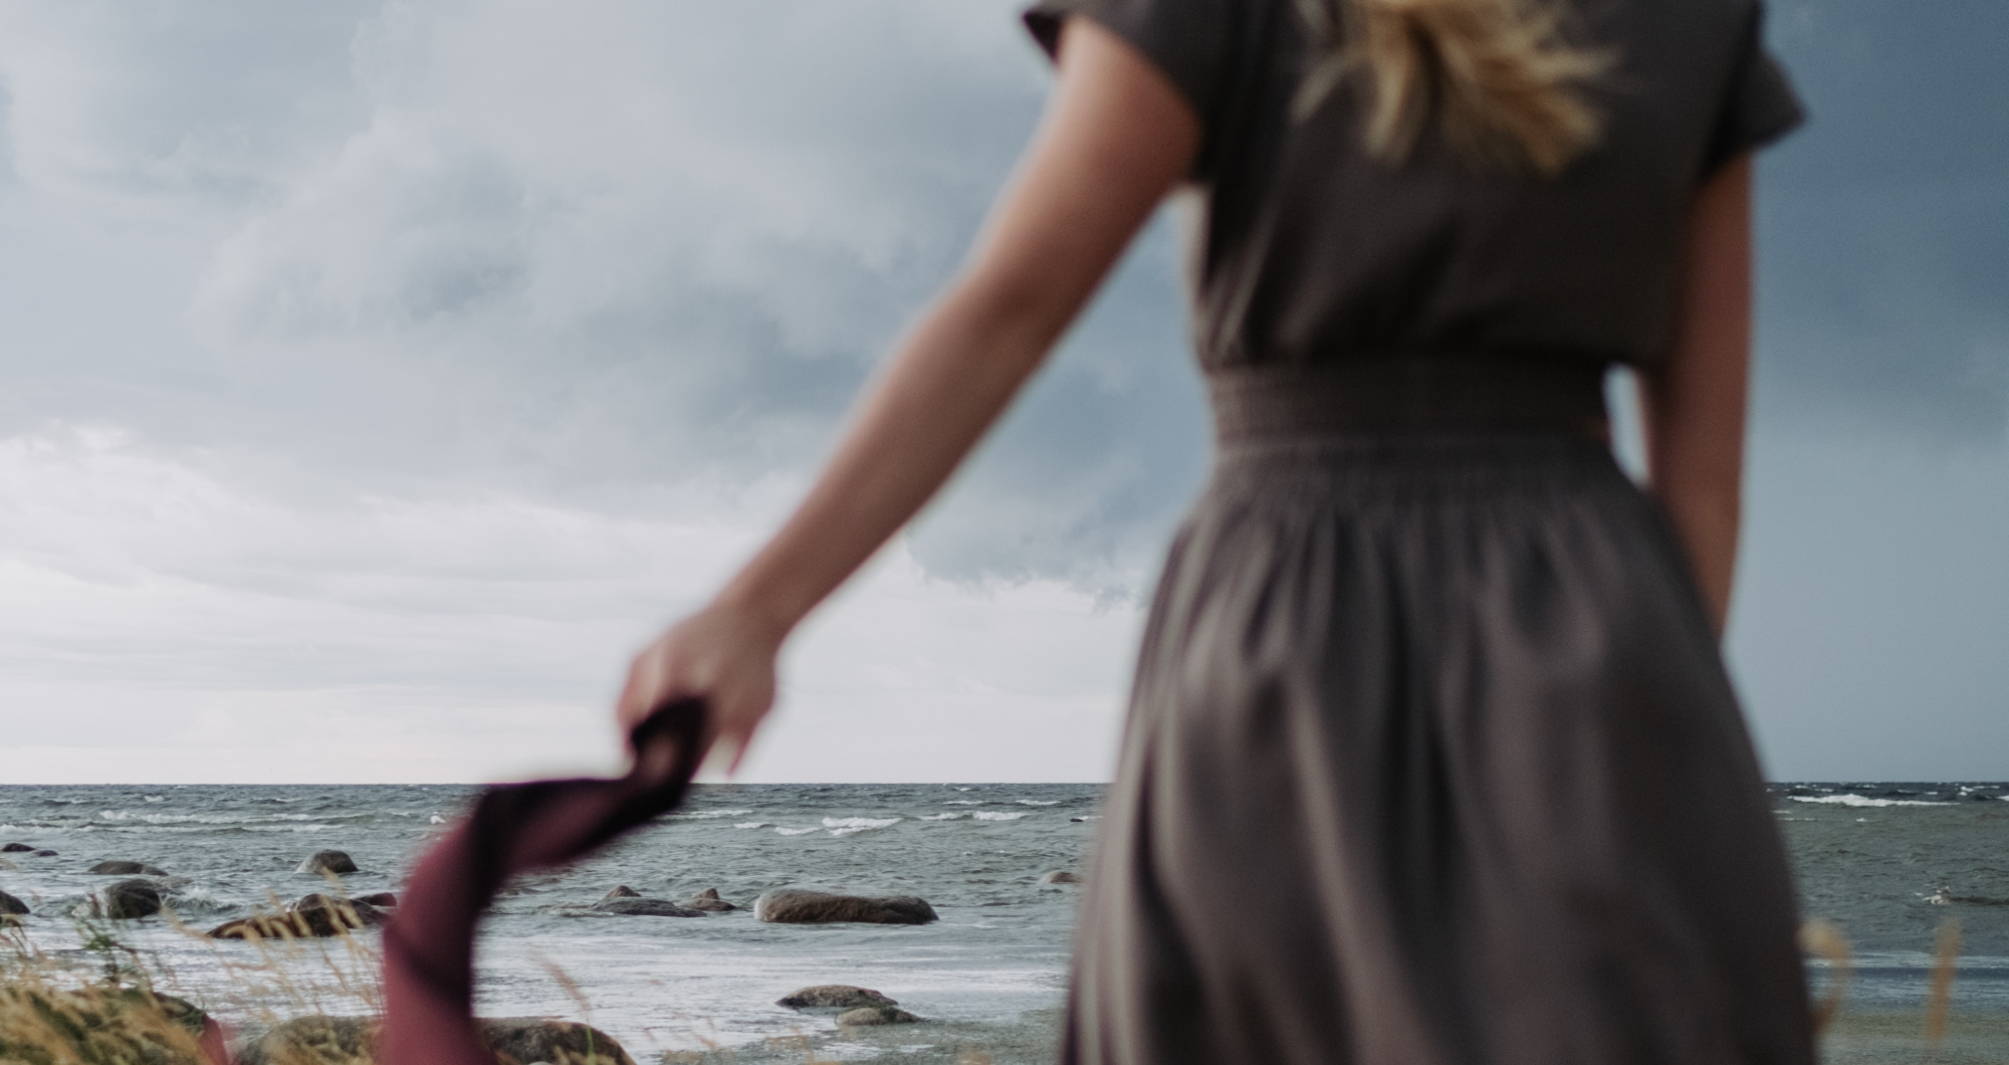 A woman in a gray linen dress waves a purple scarf, in soft focus, while the gray sky and ocean in front of her is in focus.